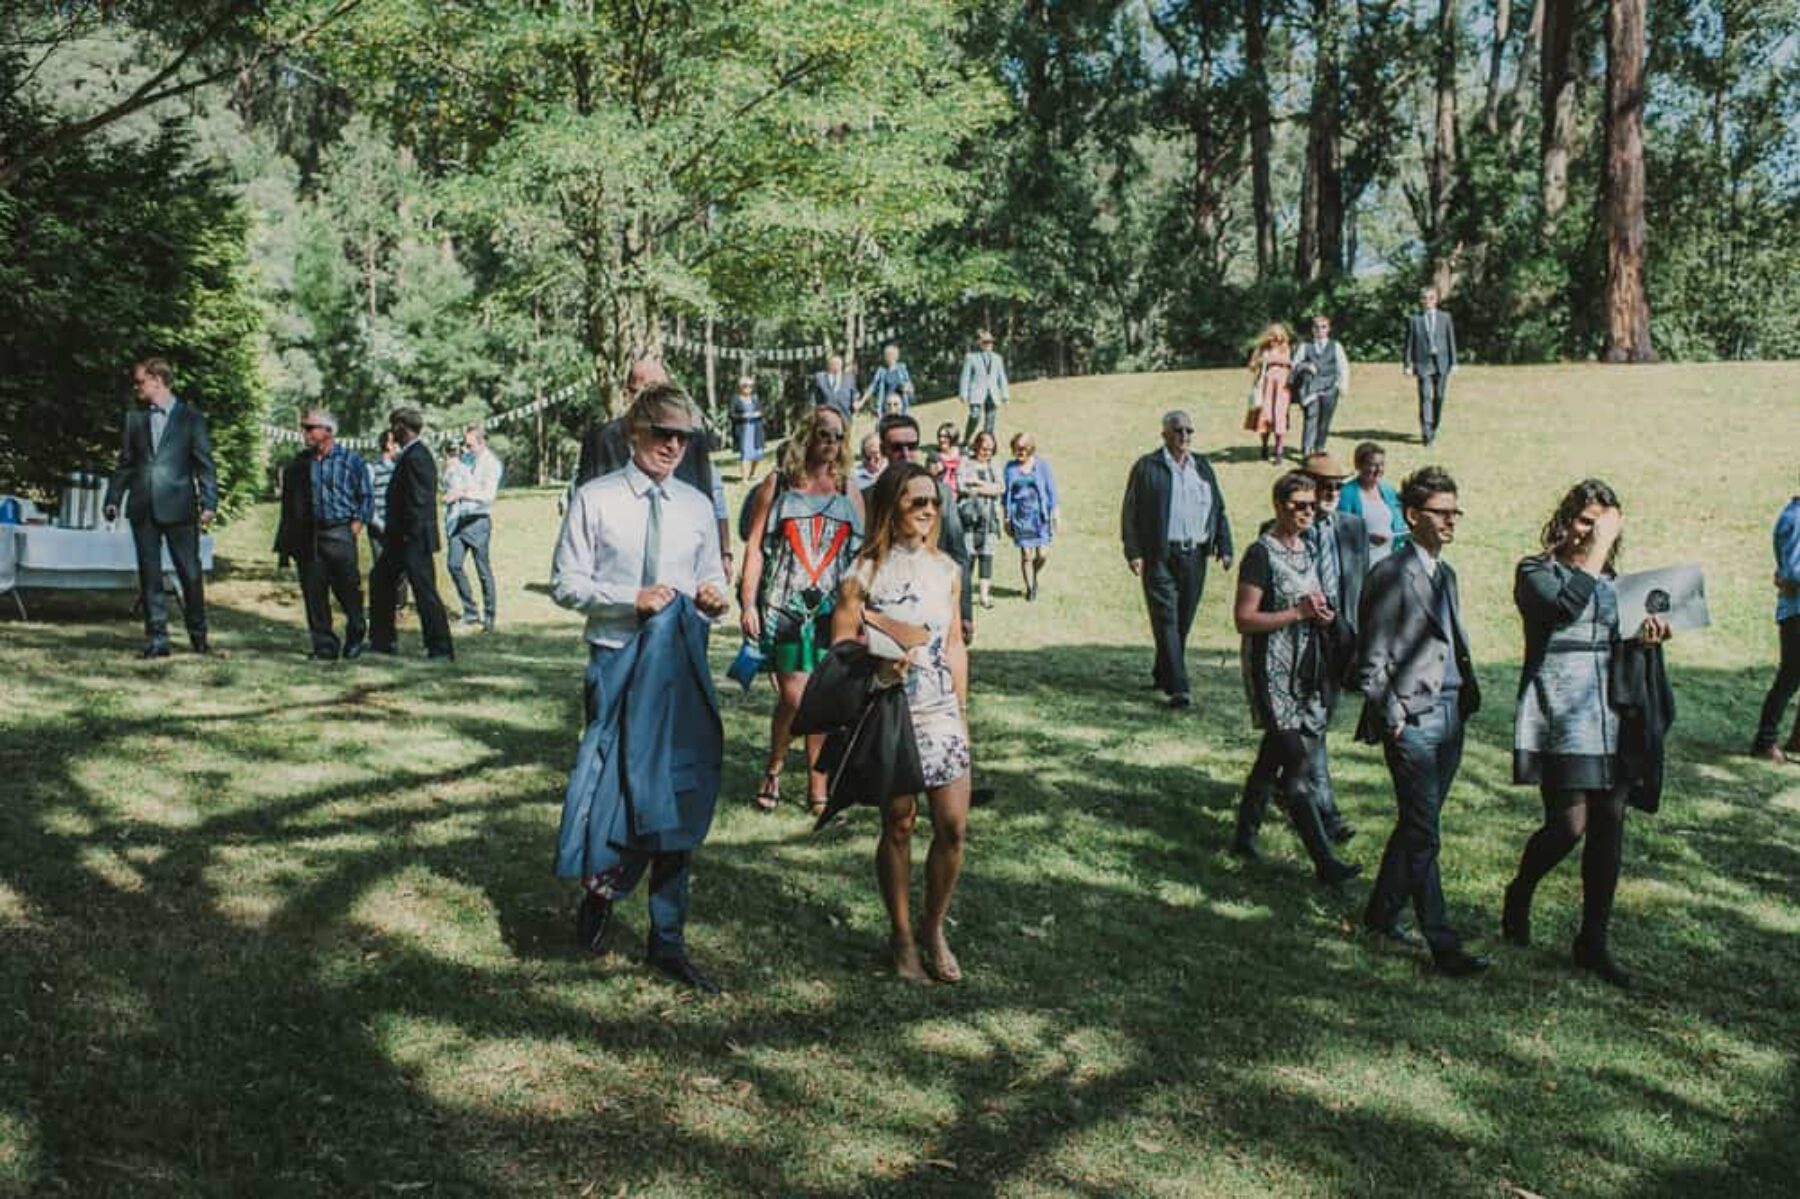 DIY festival wedding / Photography by She Takes Pictures he Makes Films